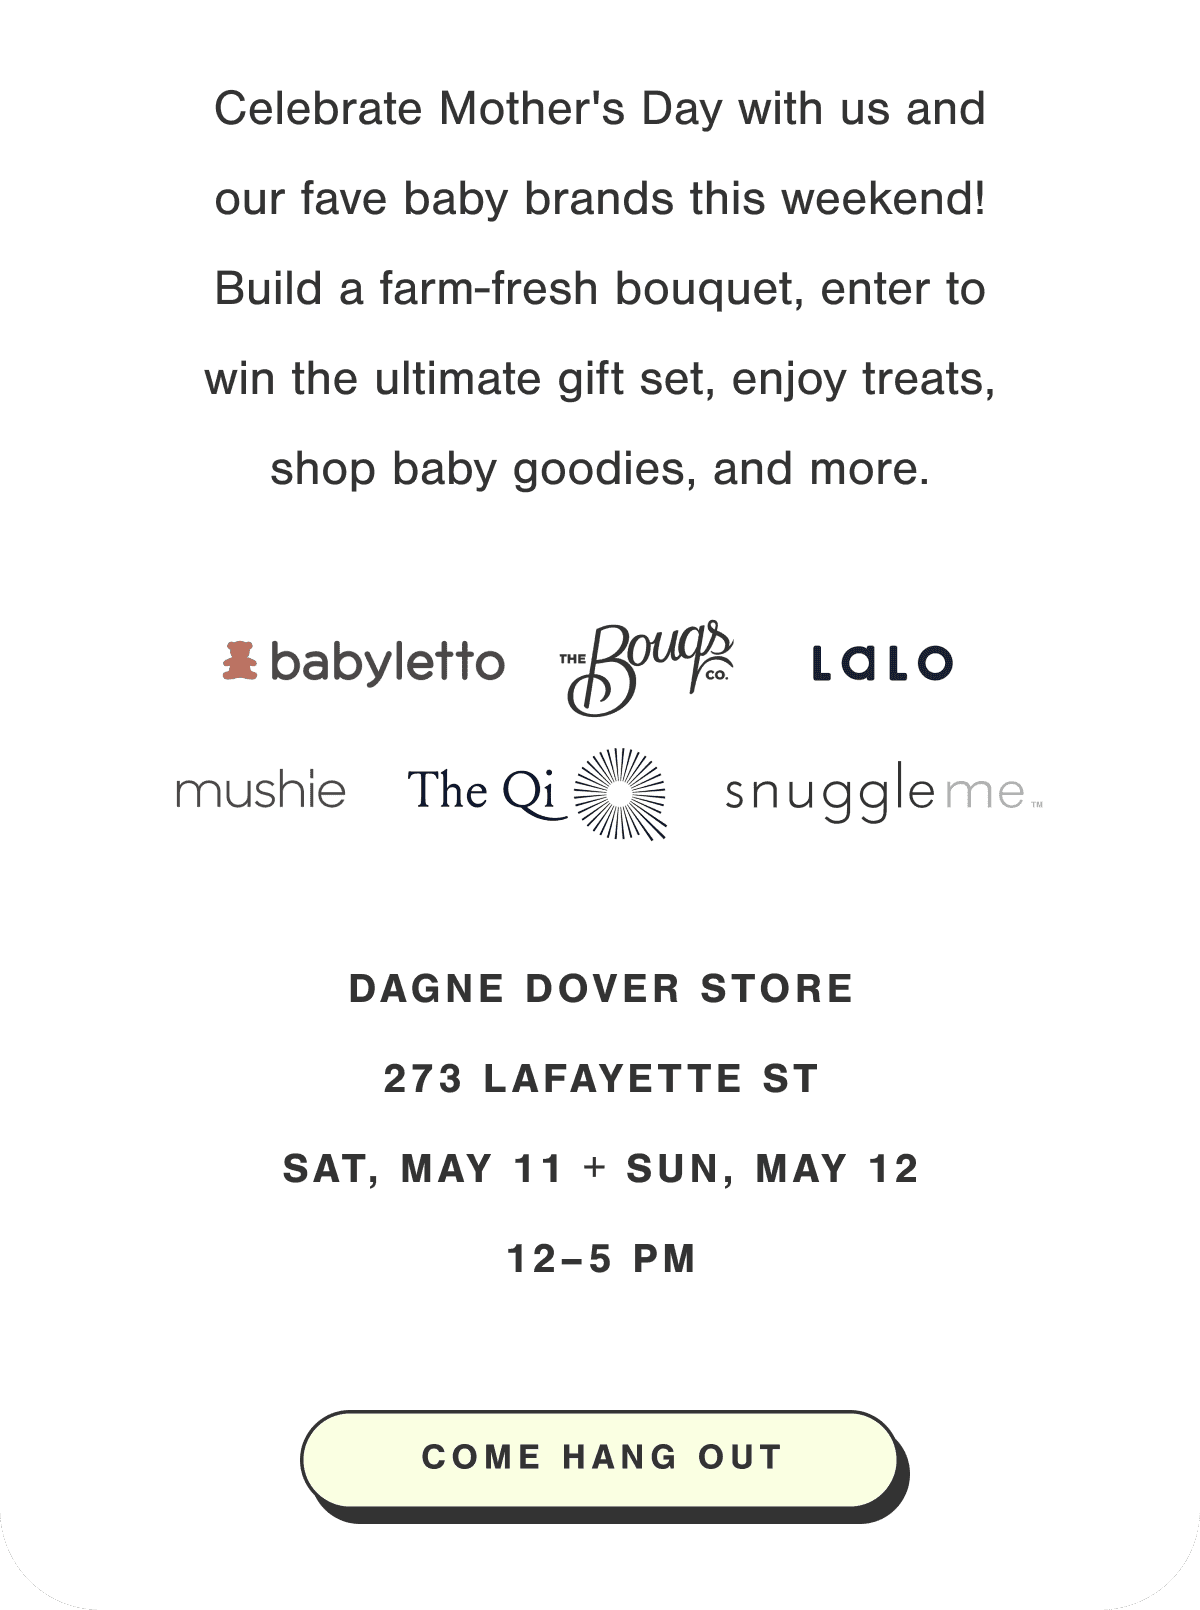 Celebrate Mother's Day with us and our fave baby brands this weekend! Build a farm-fresh bouquet, enter to win the ultimate gift set, enjoy treats, shop baby goodies, and more.